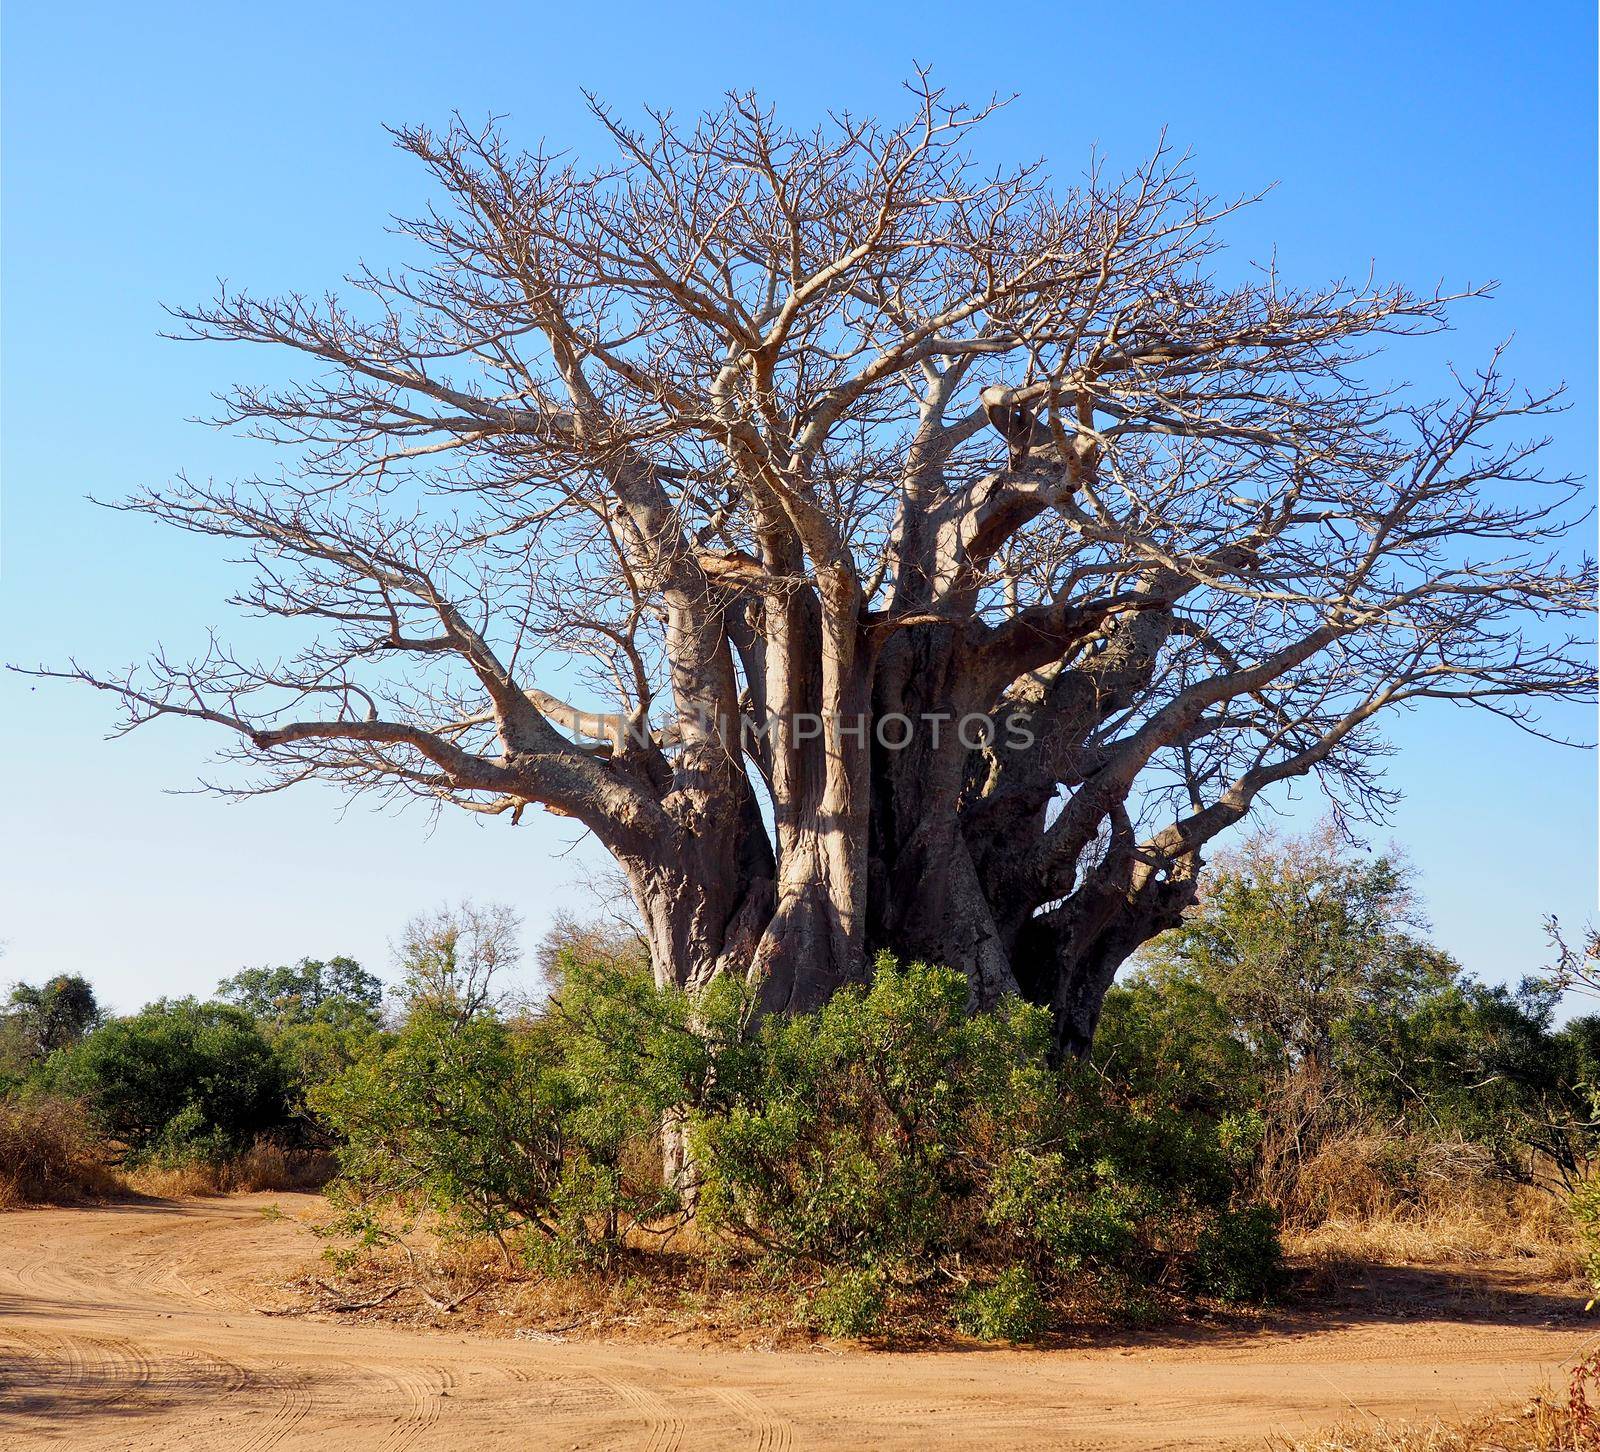 Baobab tree in Kruger Park, South Africa by fivepointsix